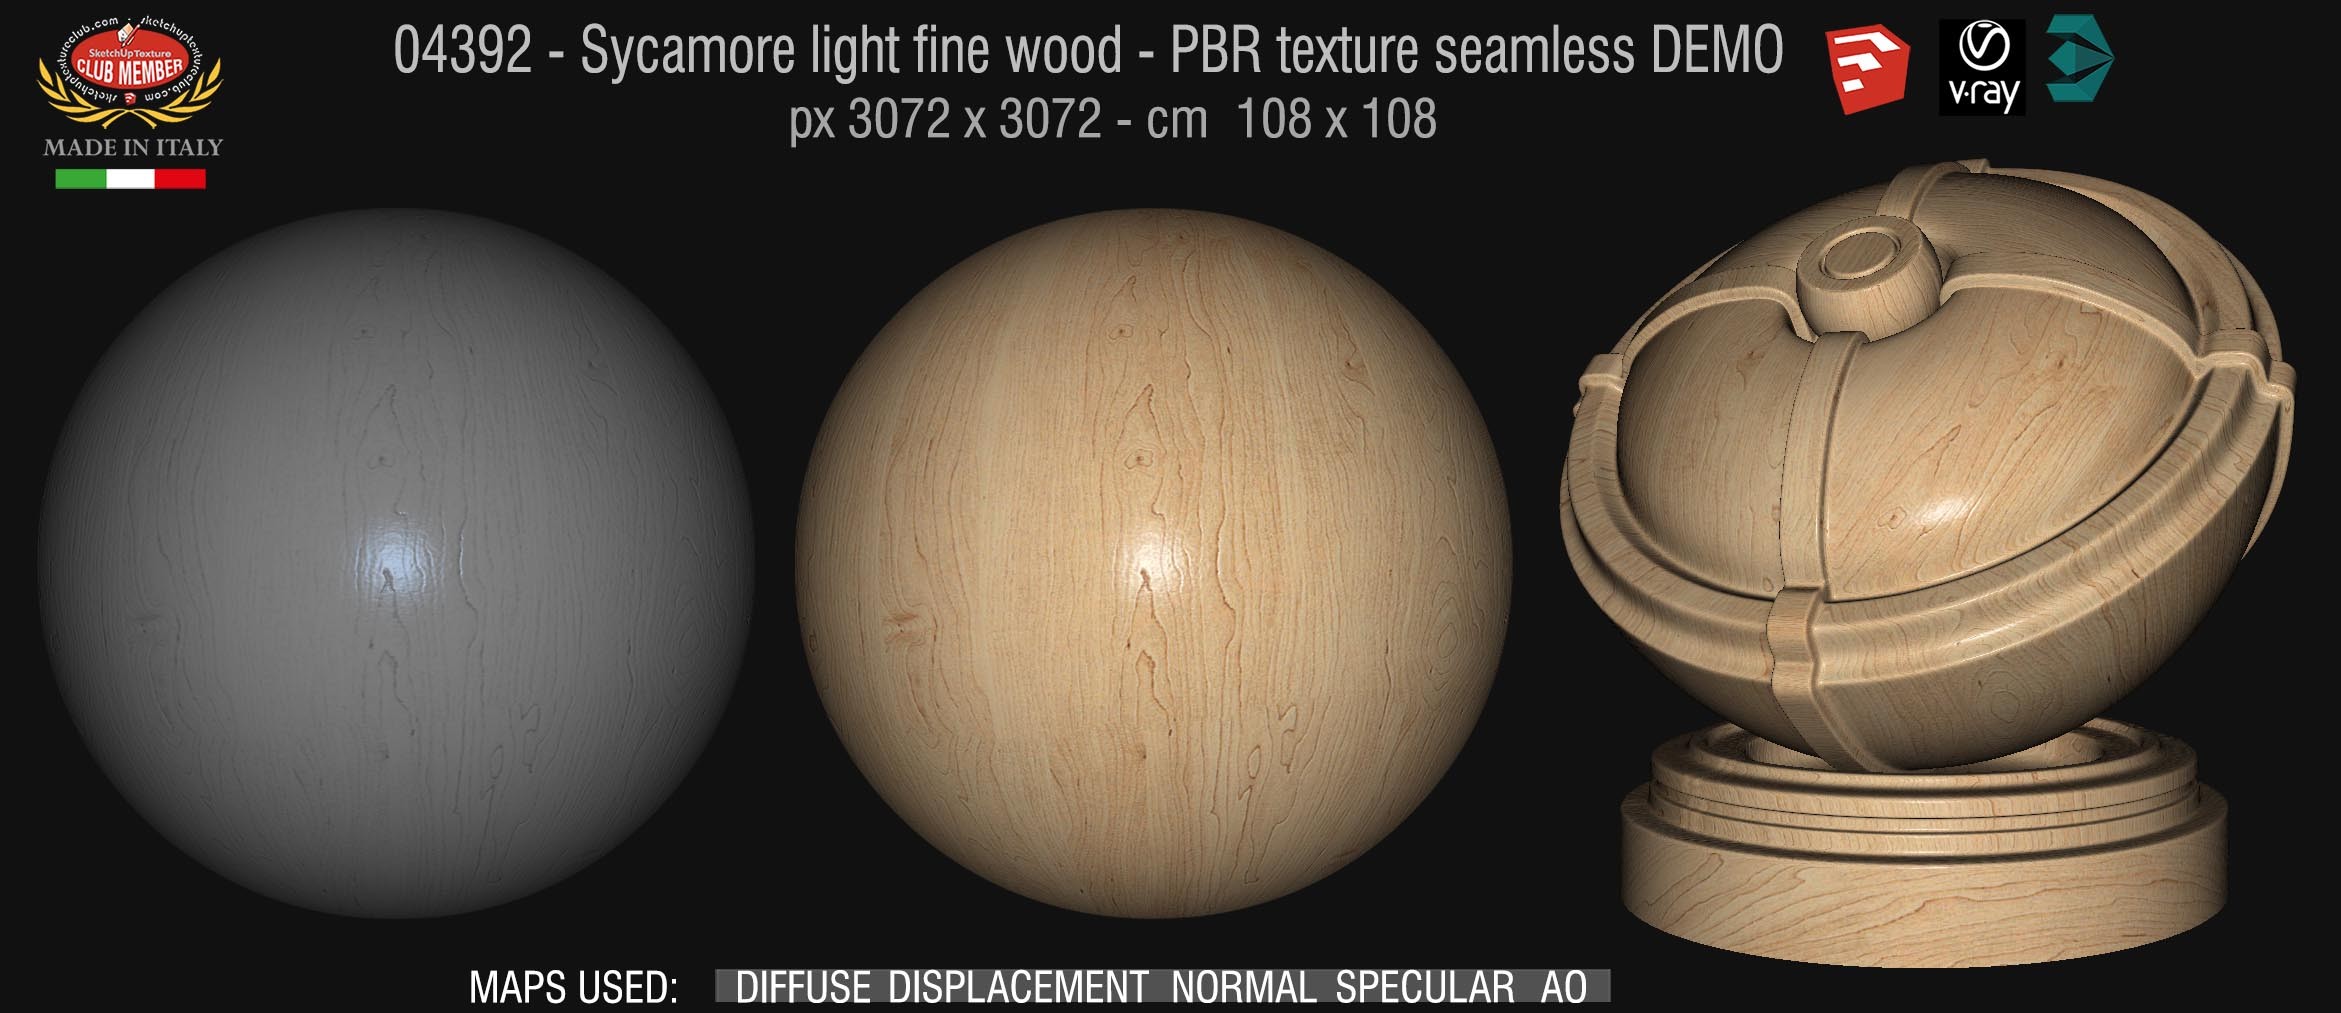 04392 Sycamore light fine wood - PBR texture seamless DEMO